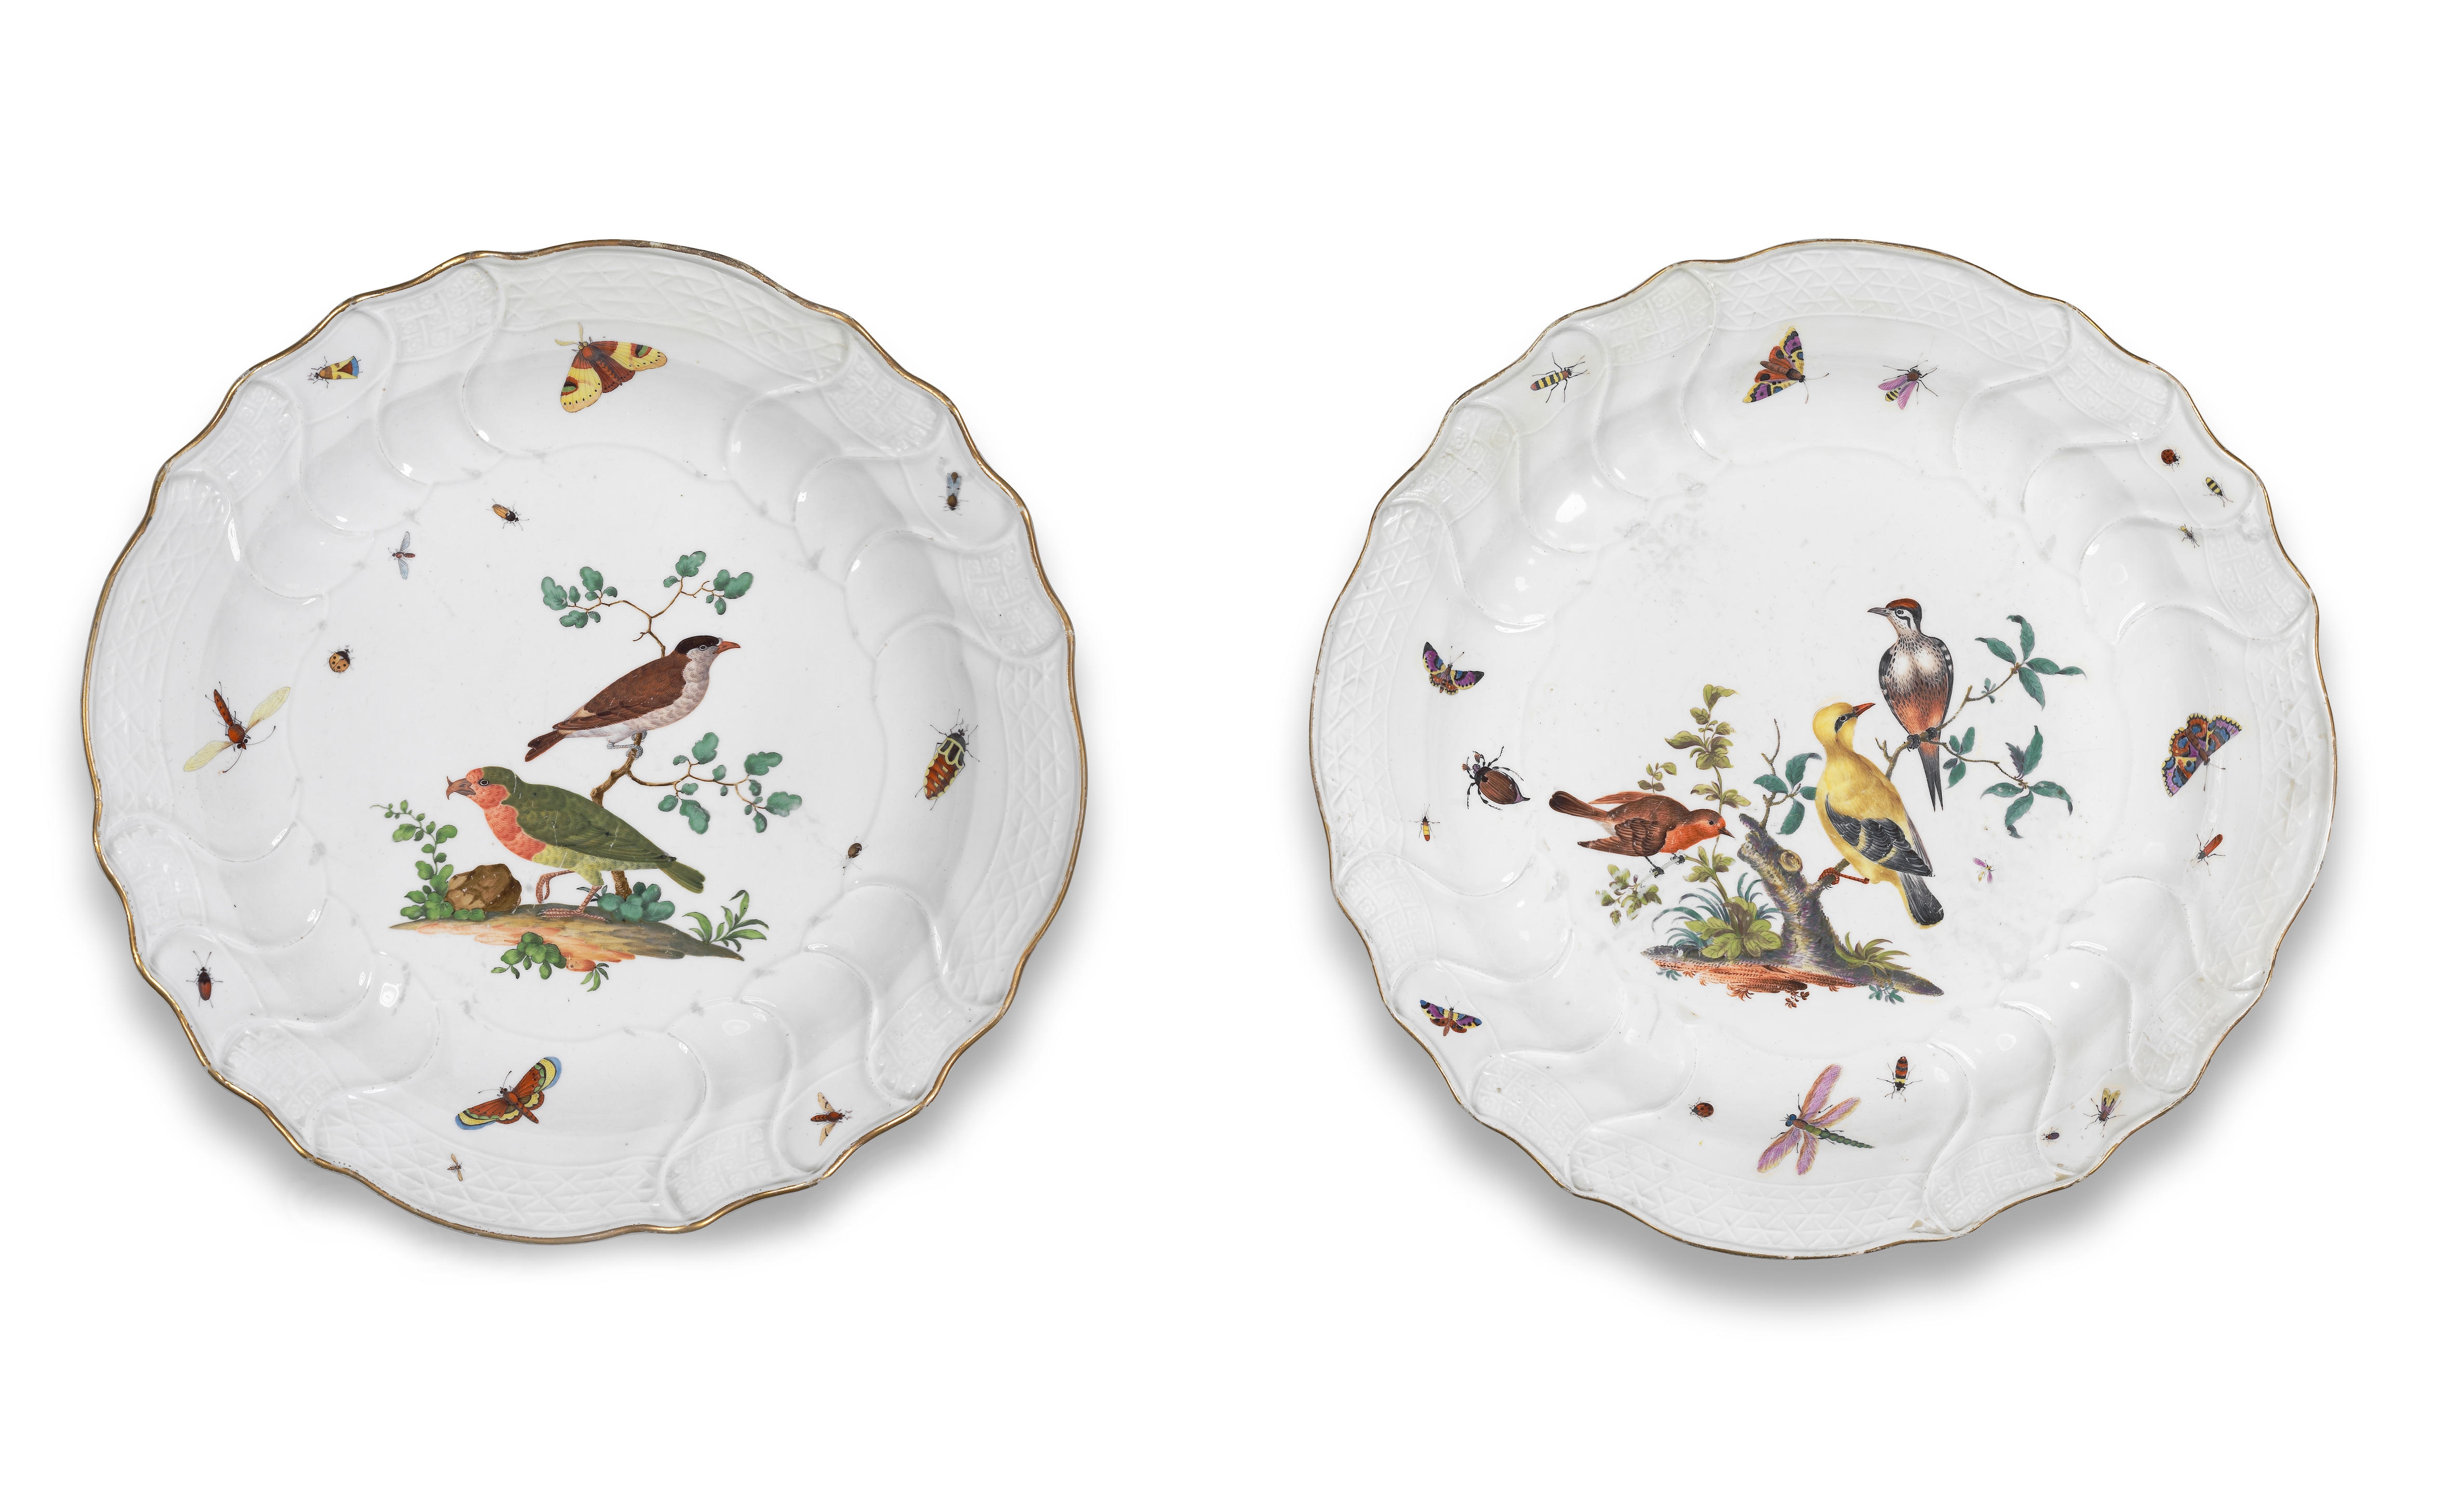 Two large Meissen ornithological dishes, mid 18th century